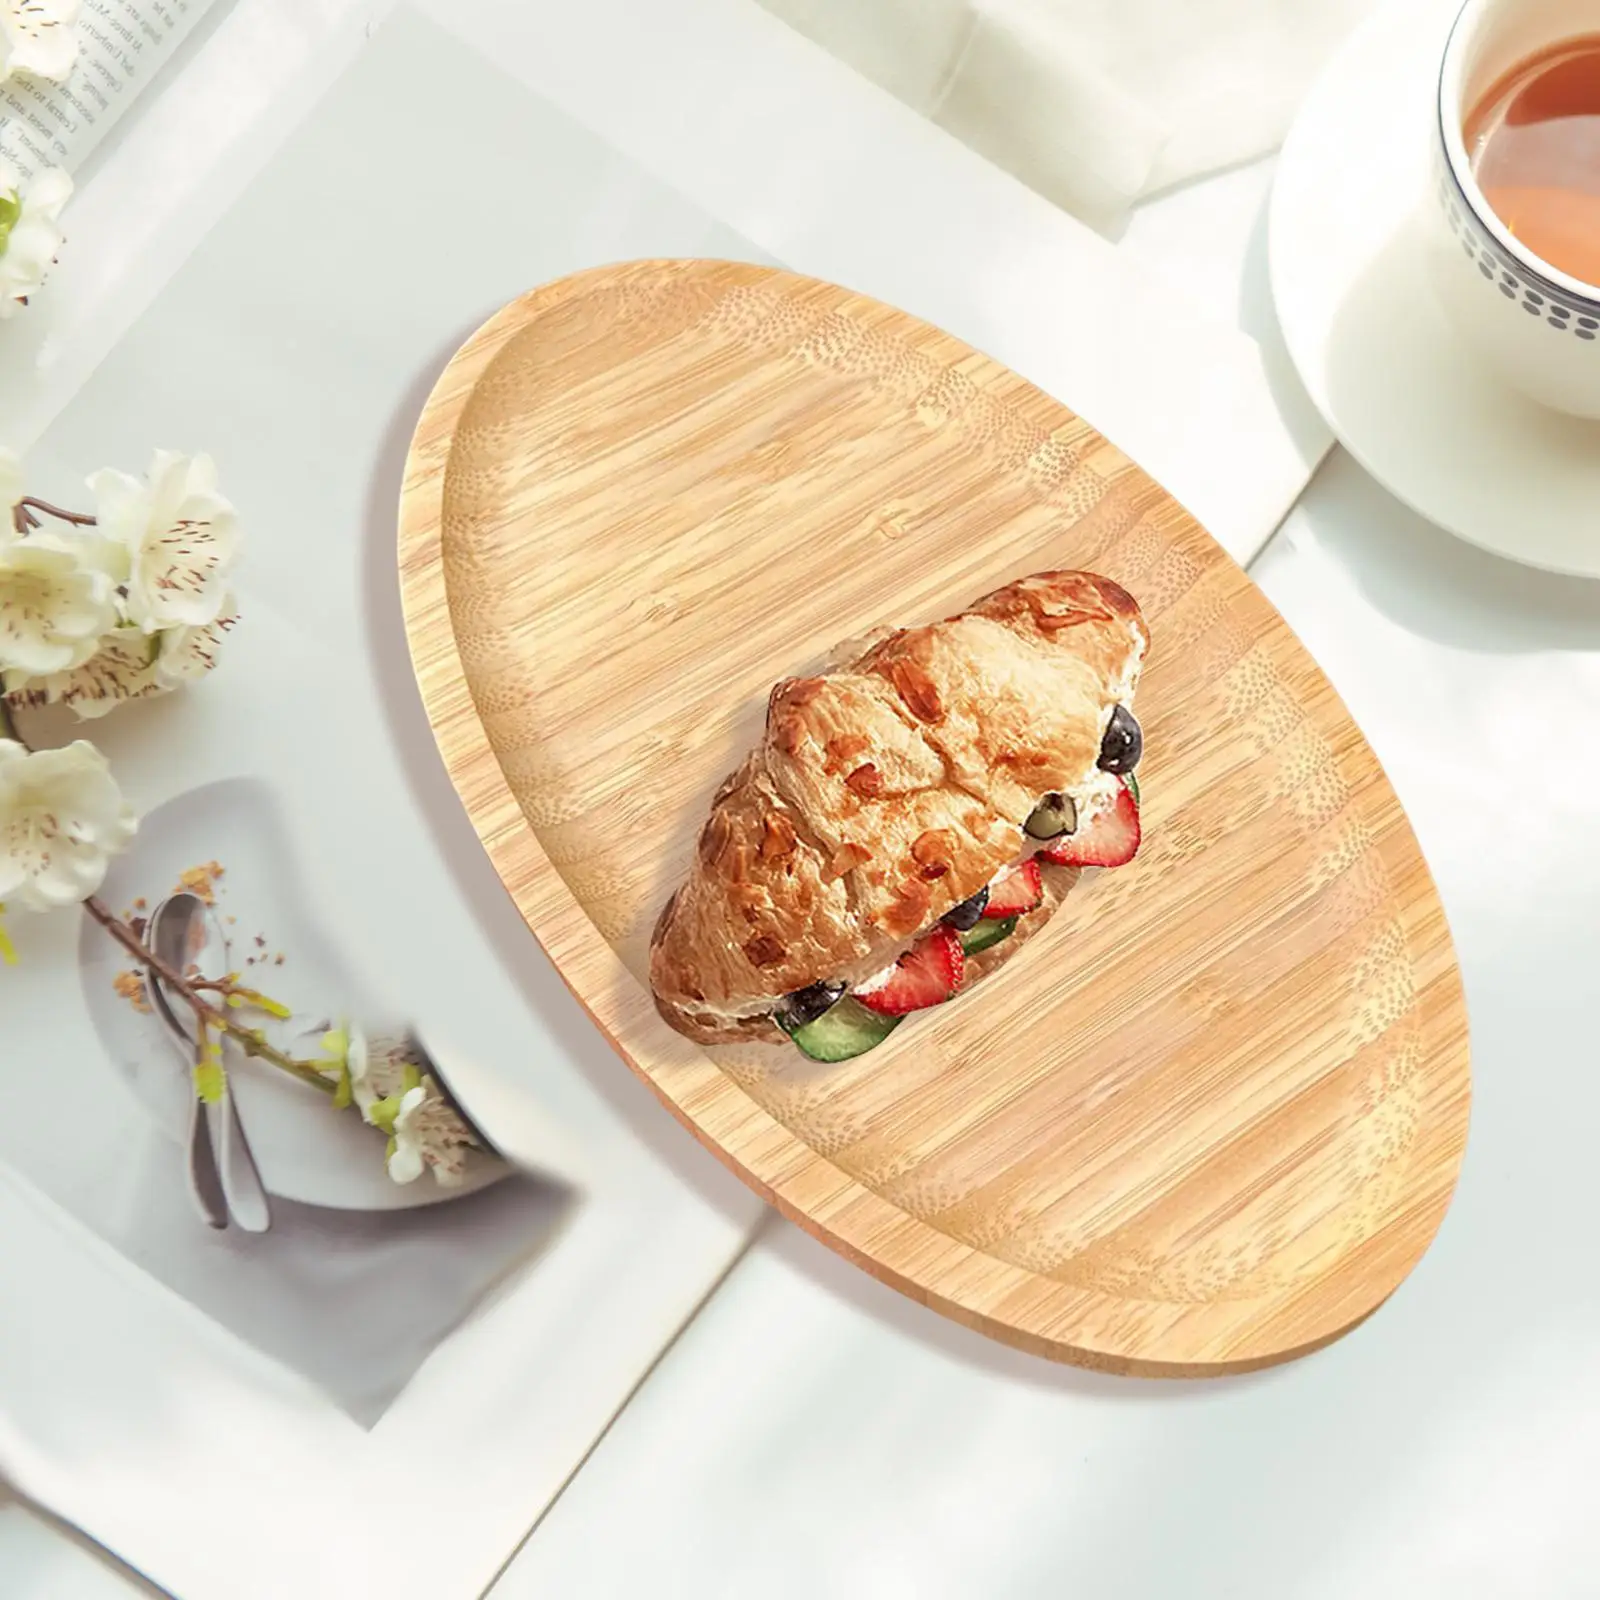 Wood Tray Wooden Serving Tray snacks plate Decorative Tray for Food Coffee Table Breakfast Dinner Party